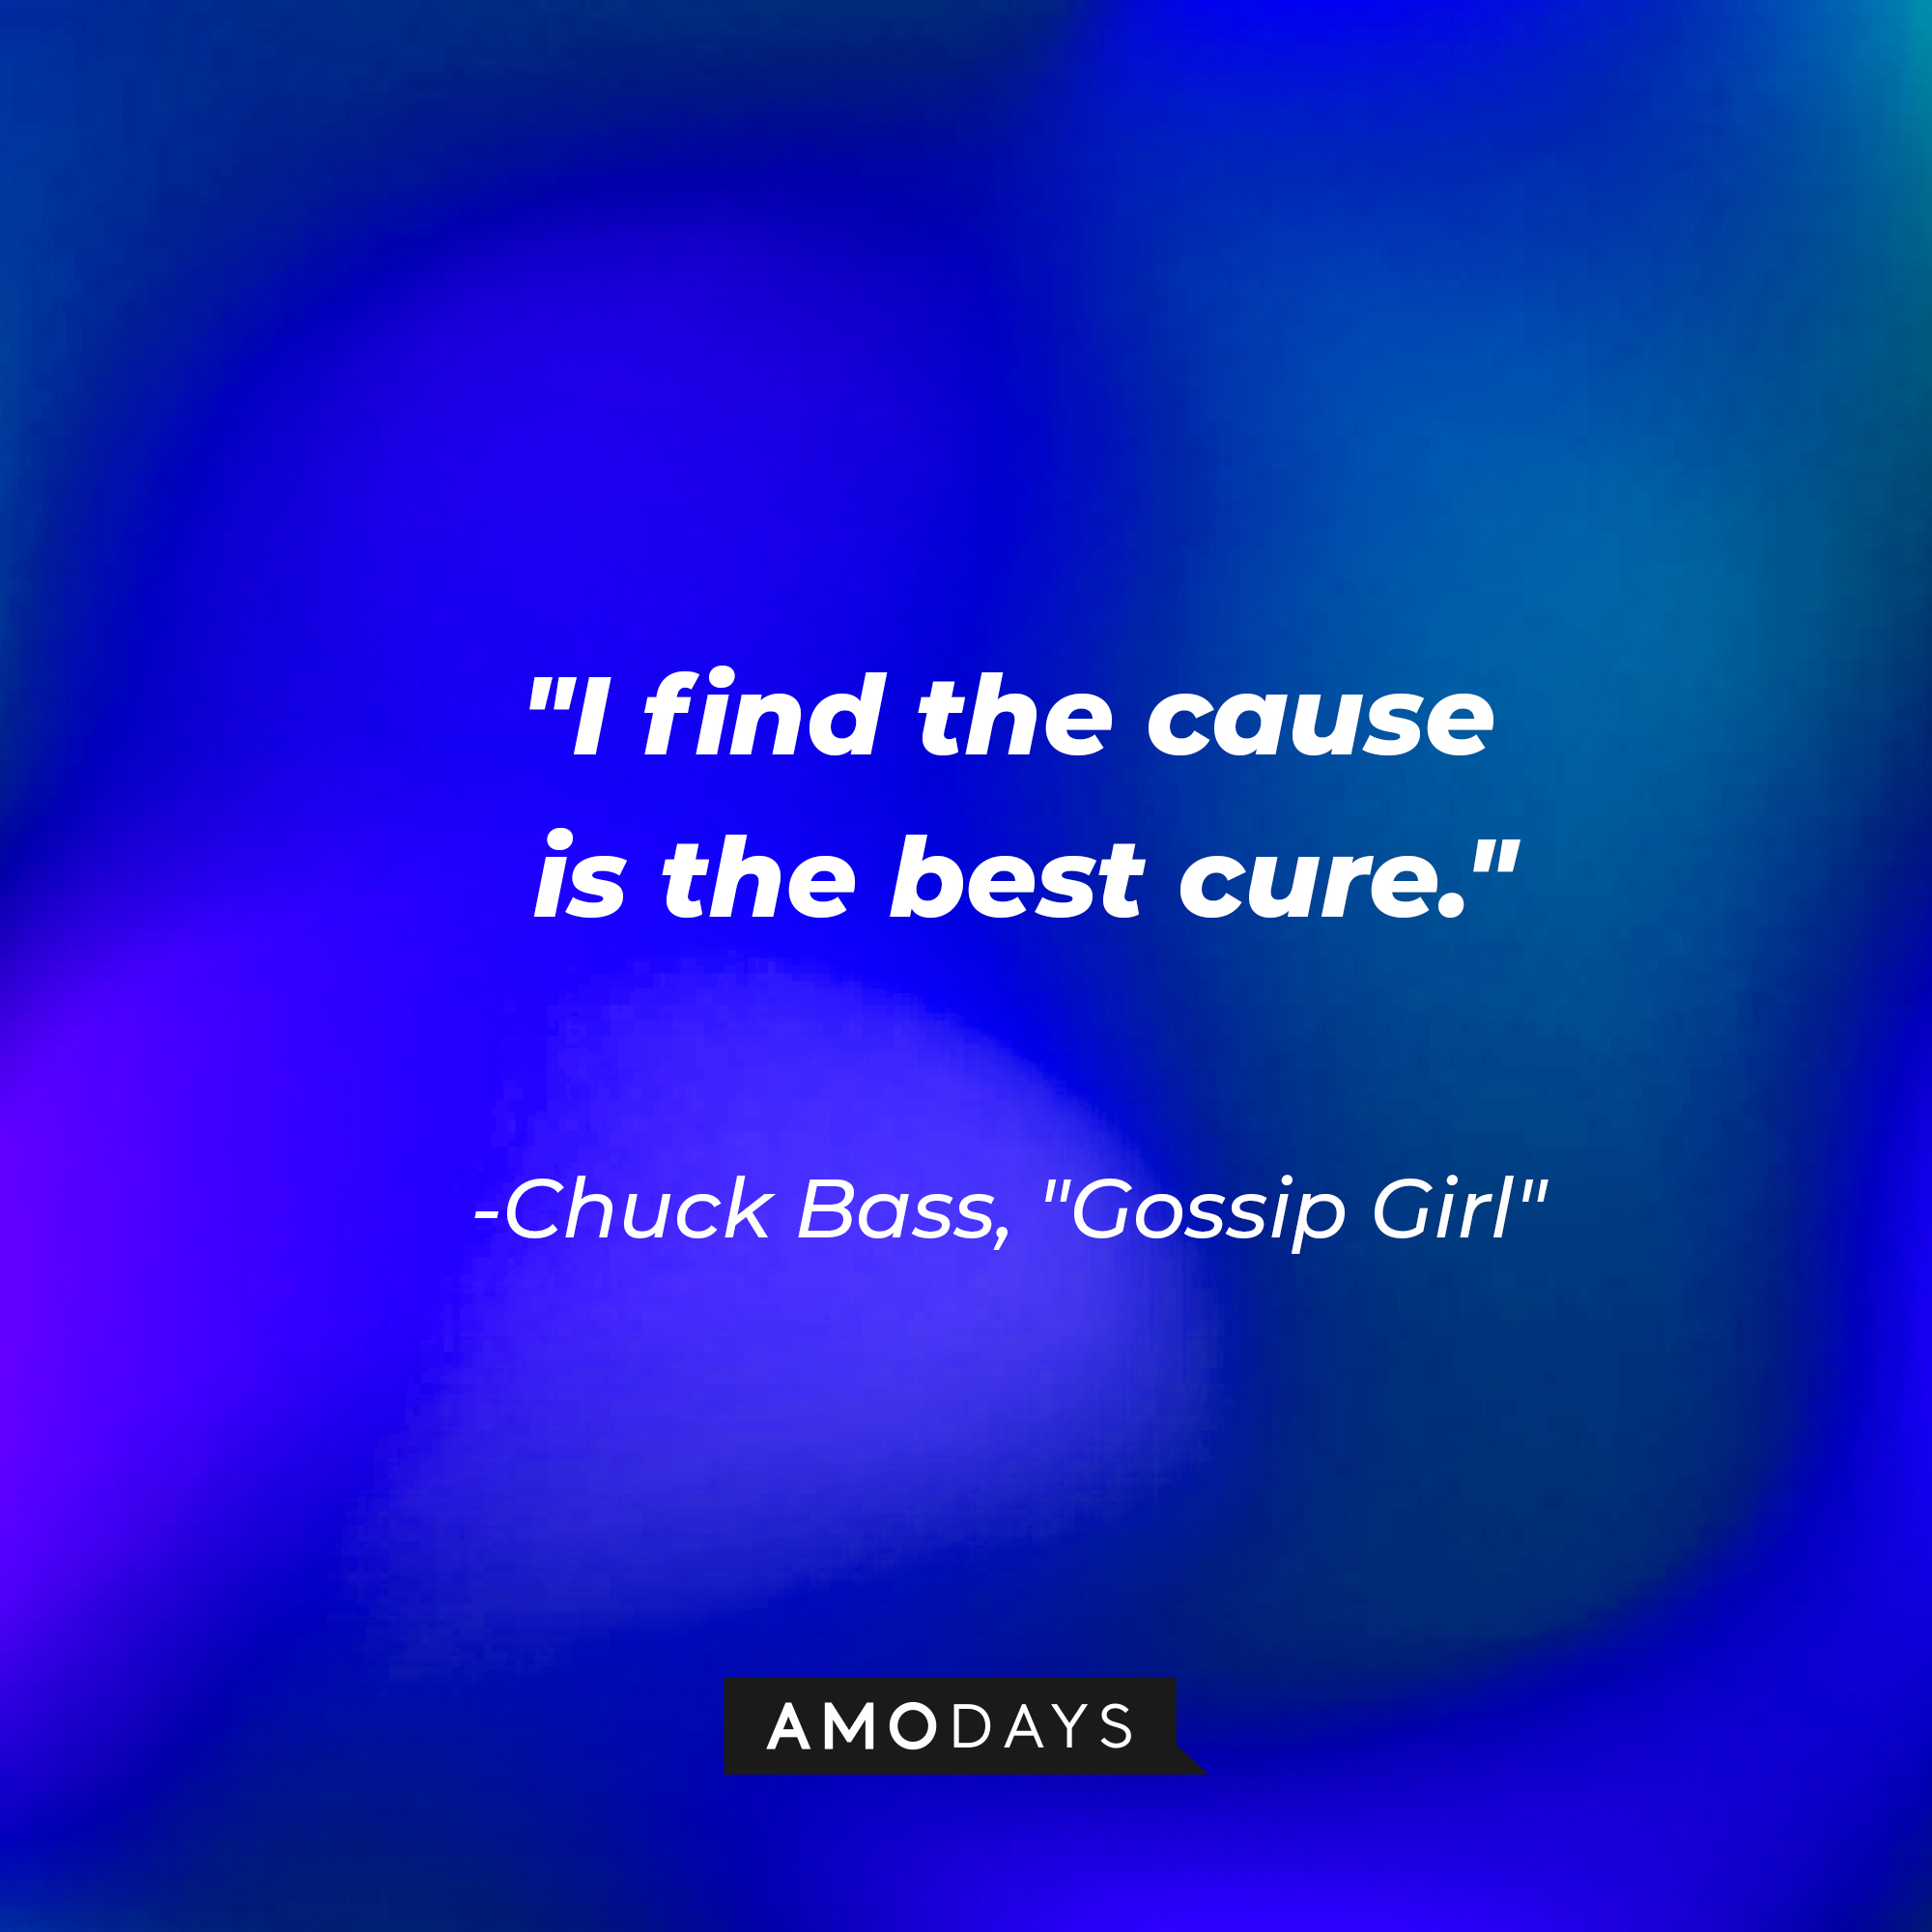 Chuck Bass' quote: "I find the cause is the best cure." | Source: AmoDays